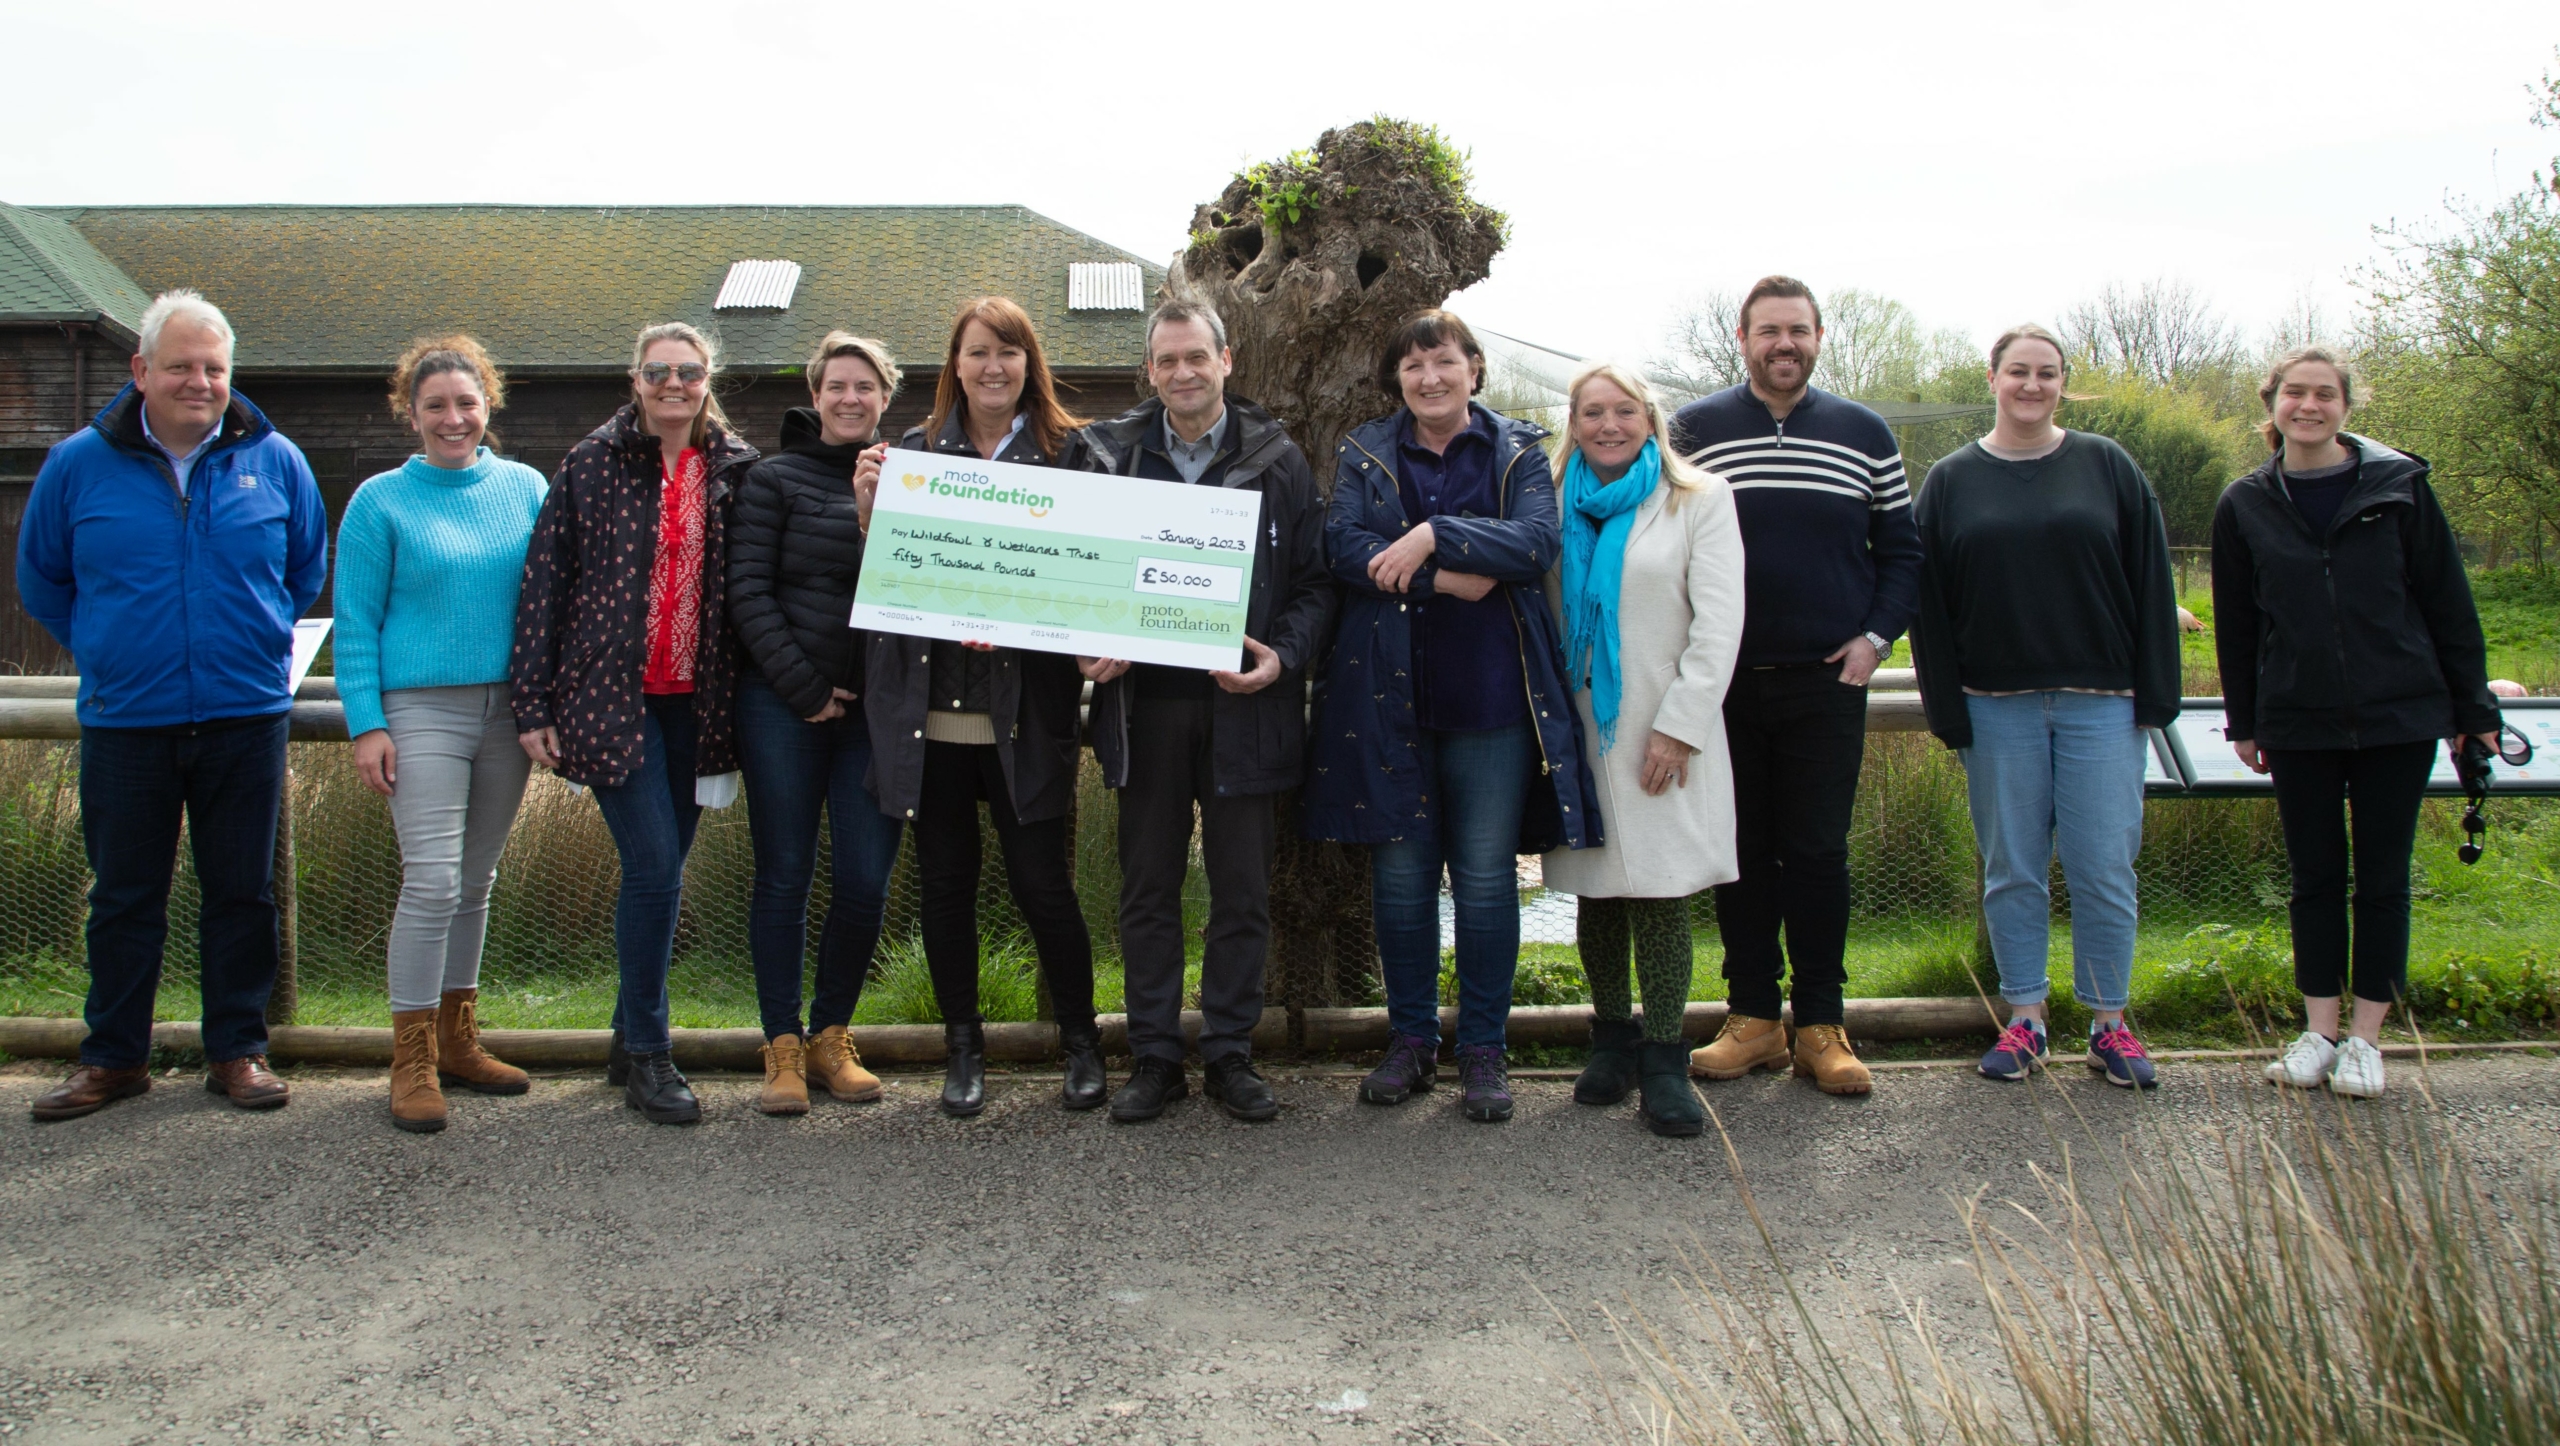 Partnership in action: Moto Foundation's £50,000 donation to the Wildfowl & Wetland Trust